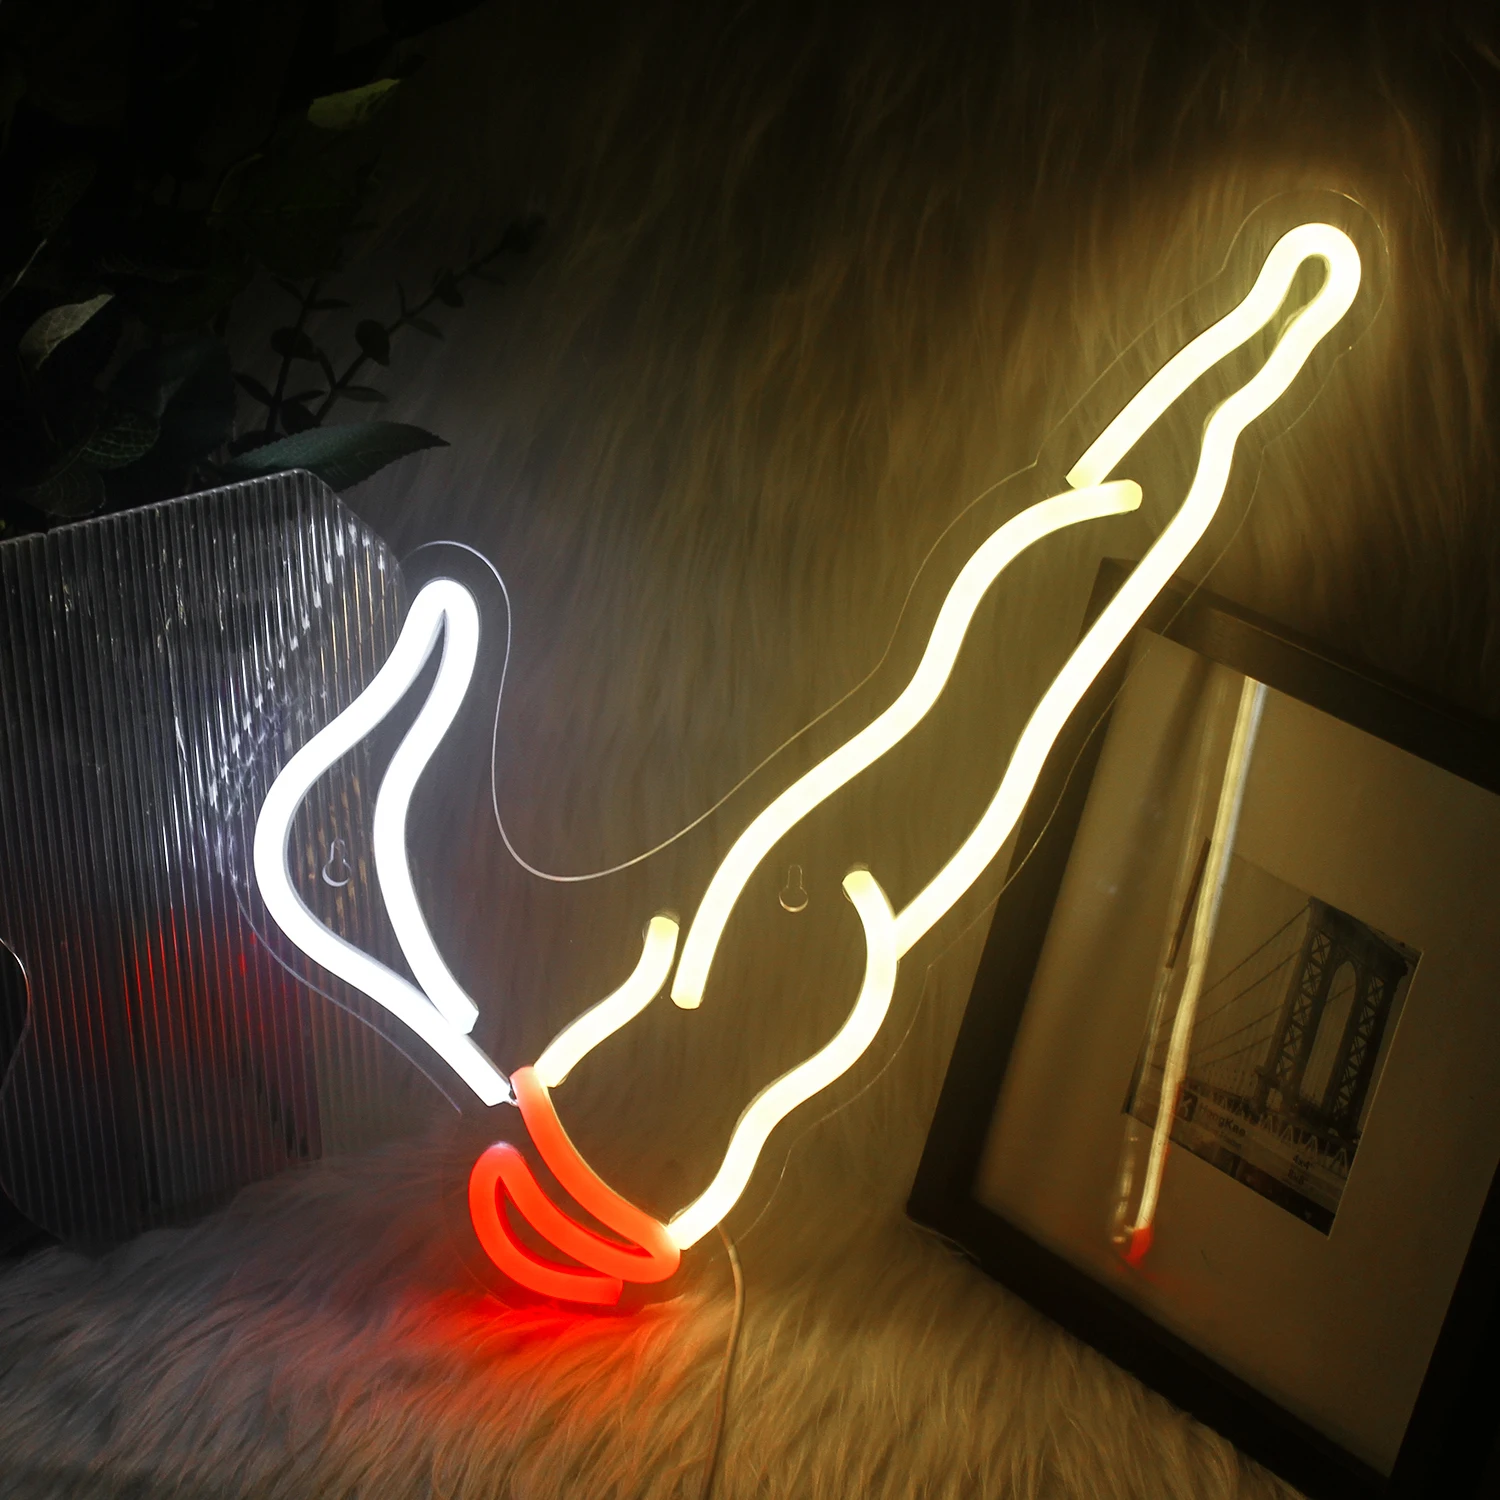 Ineonlife Smoking Cool Neon Sign LED Lighting Indoor Art Hanging Wall Decorations For Festive Party Room Bar Bedroom Restaurant